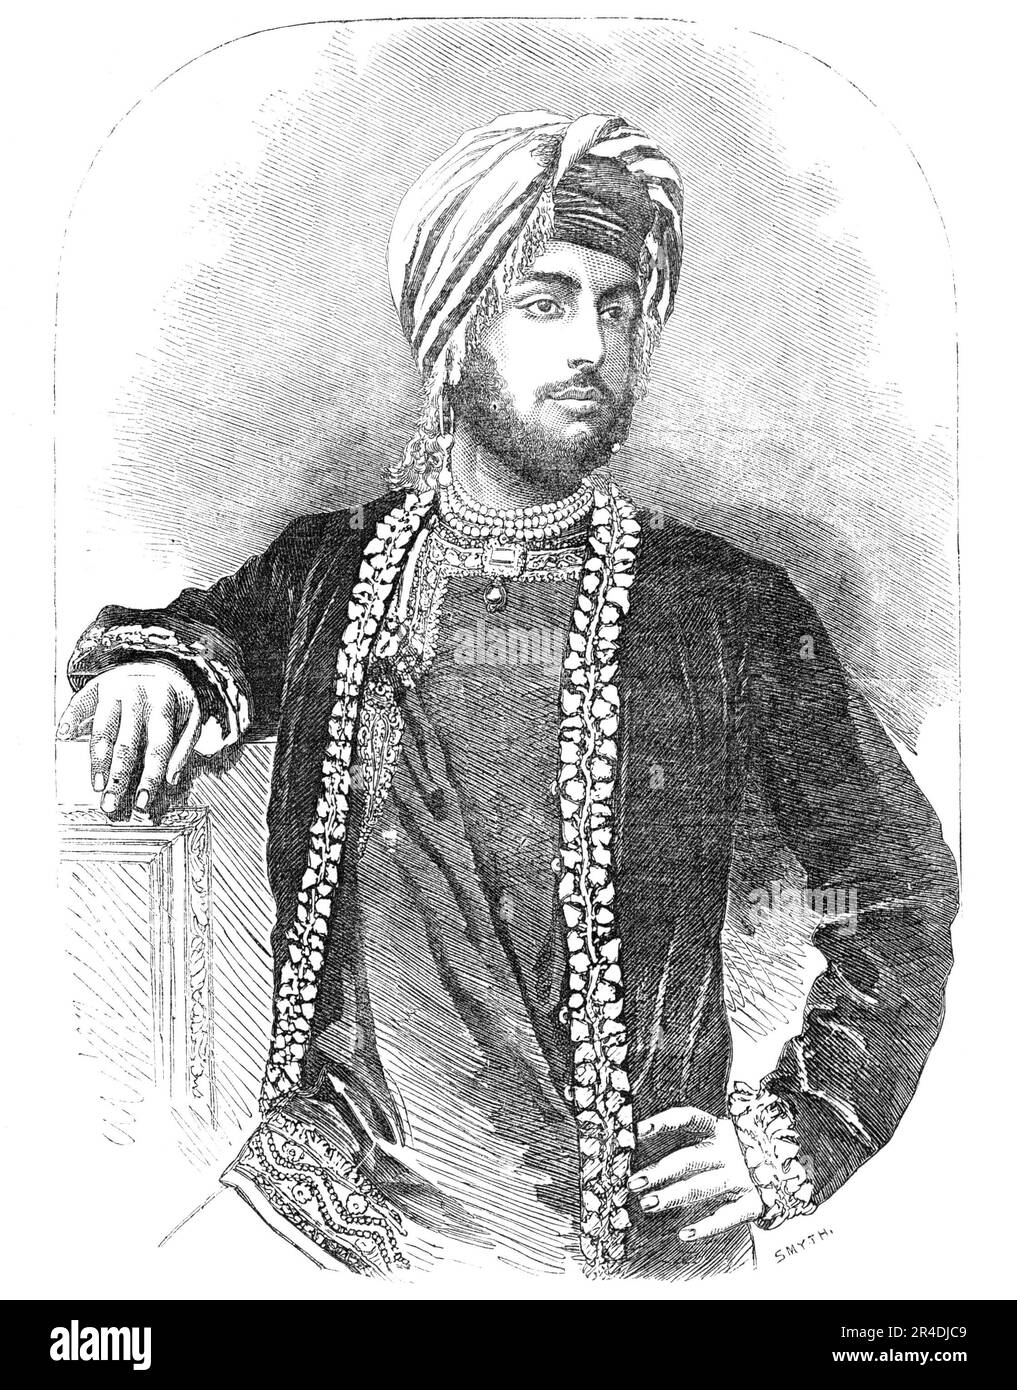 Dhuleep Sing - from a collodion by O. G. Rejlander, Wolverhampton, 1856. Portrait of the last Maharaja of the Sikh Empire, '...Dhuleep Sing, now on a visit to this country [England].... On the 15th September, 1843, the Maharajah of Lahore, Shere Sing, and his two sons, were murdered; and, the murderer himself being slain almost immediately afterwards, Dhuleep Sing, then only ten years of age, was placed upon the throne. Executions and bloodshed followed in the Sikh capital...On the 18th May, 1849, the Maharanee Chunda, the mother of Dhuleep, made her escape, and arrived at Nepaul. Dhuleep hims Stock Photo